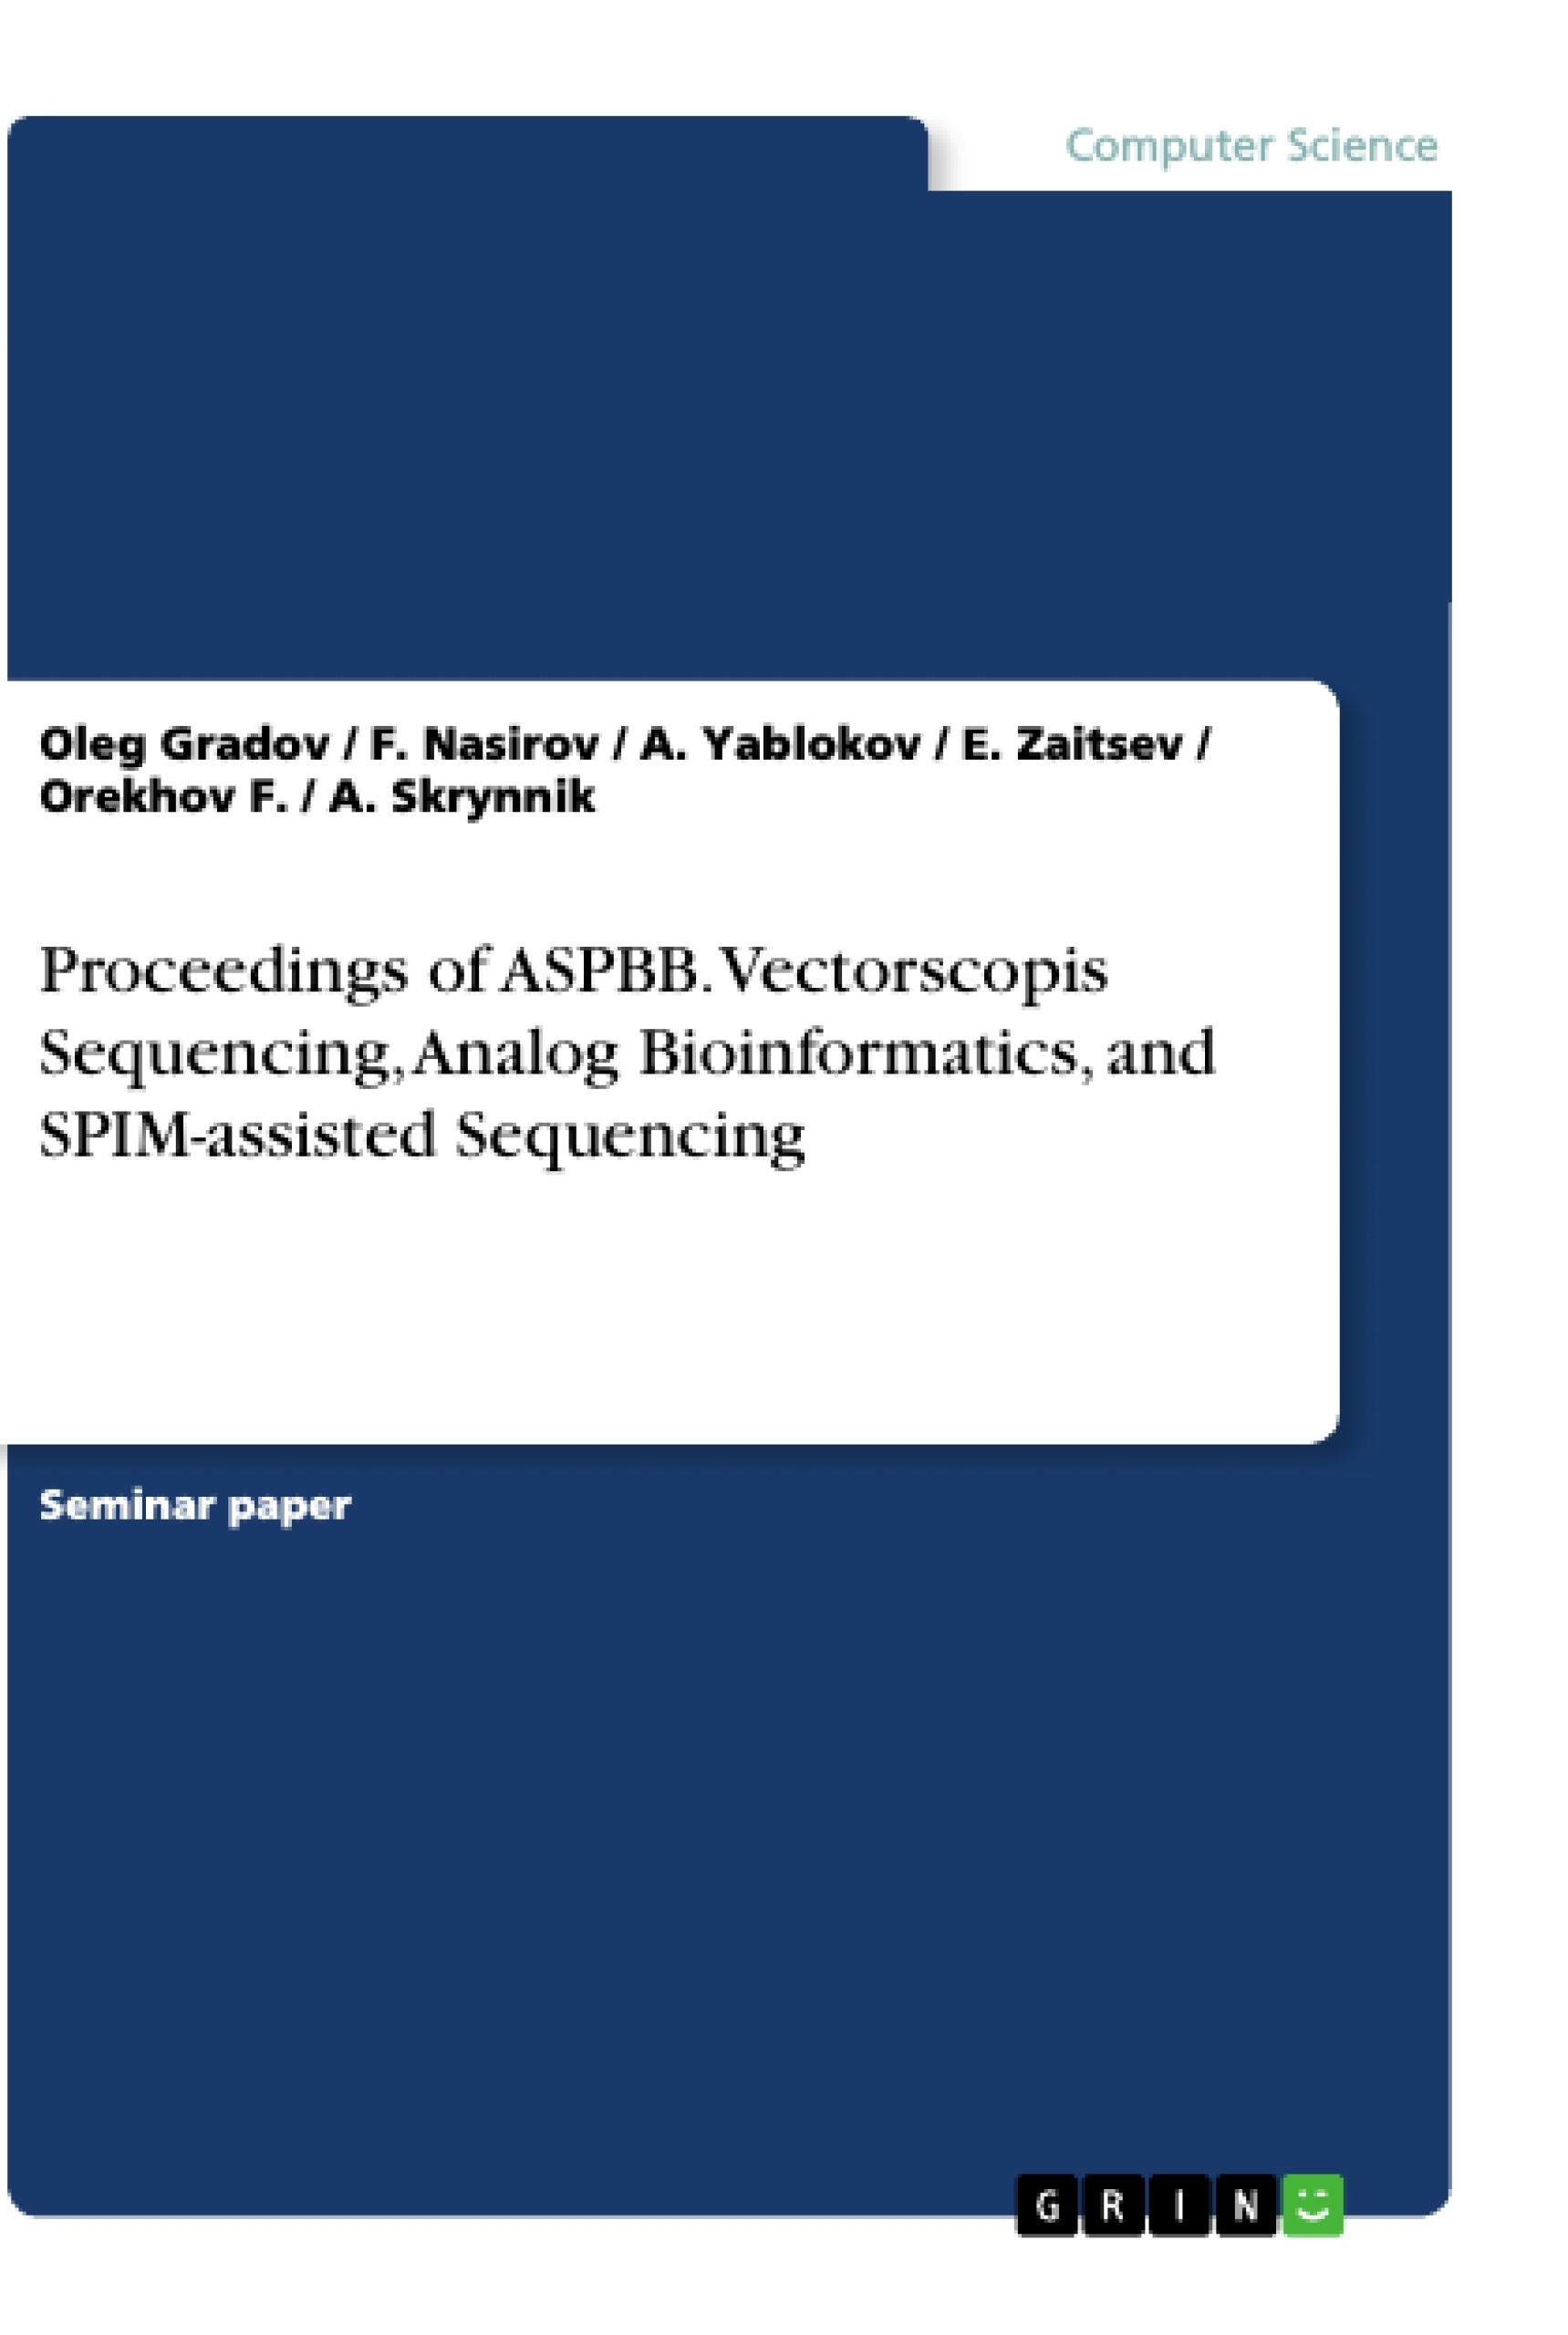 Titre: Proceedings of ASPBB. Vectorscopis Sequencing,  Analog Bioinformatics, and SPIM-assisted Sequencing